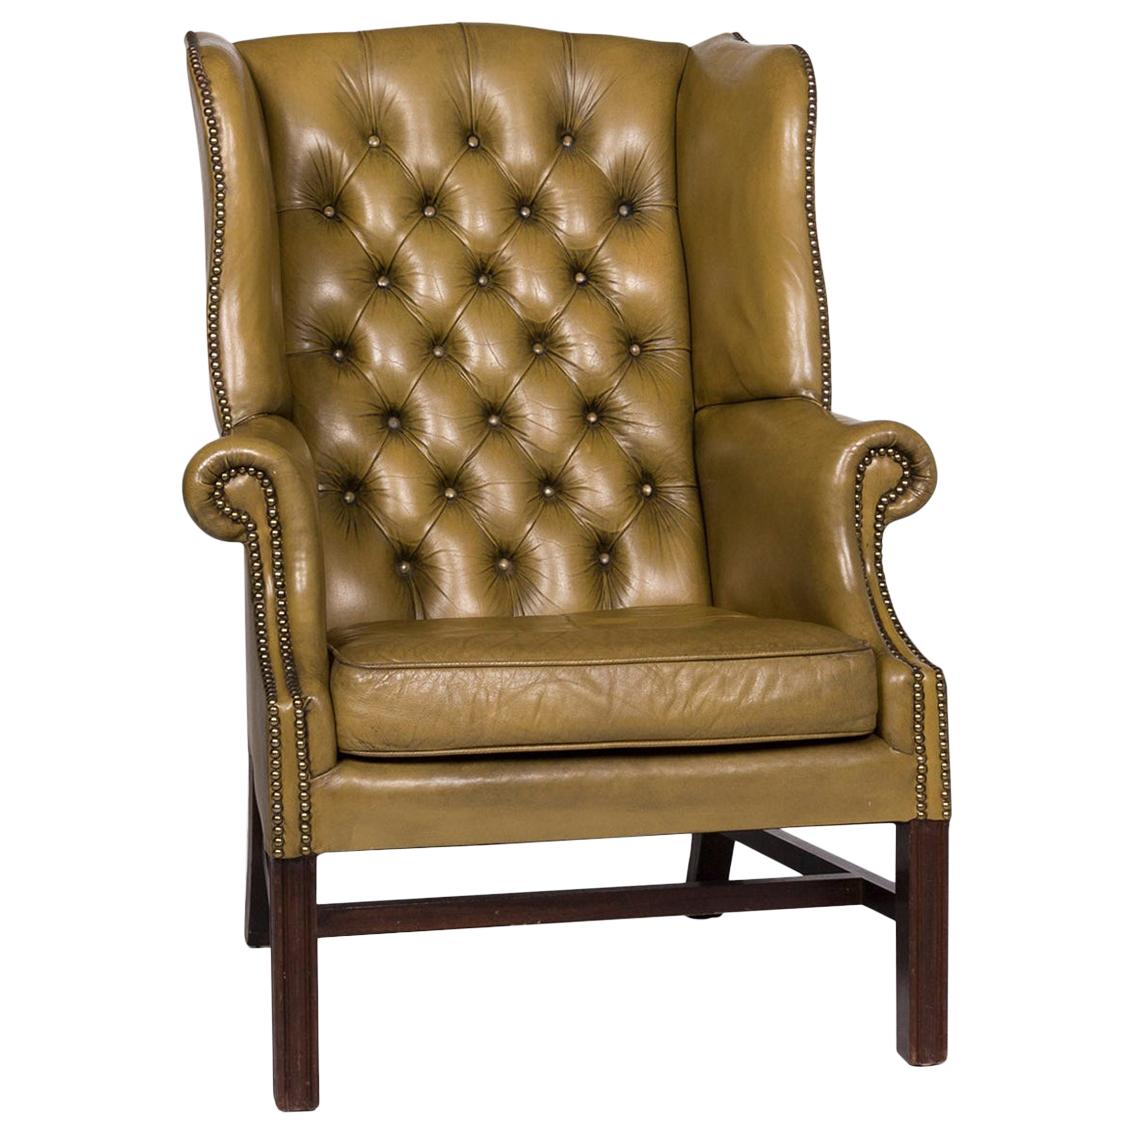 Centurion Leather Armchair Olive Green Chesterfield Retro For Sale